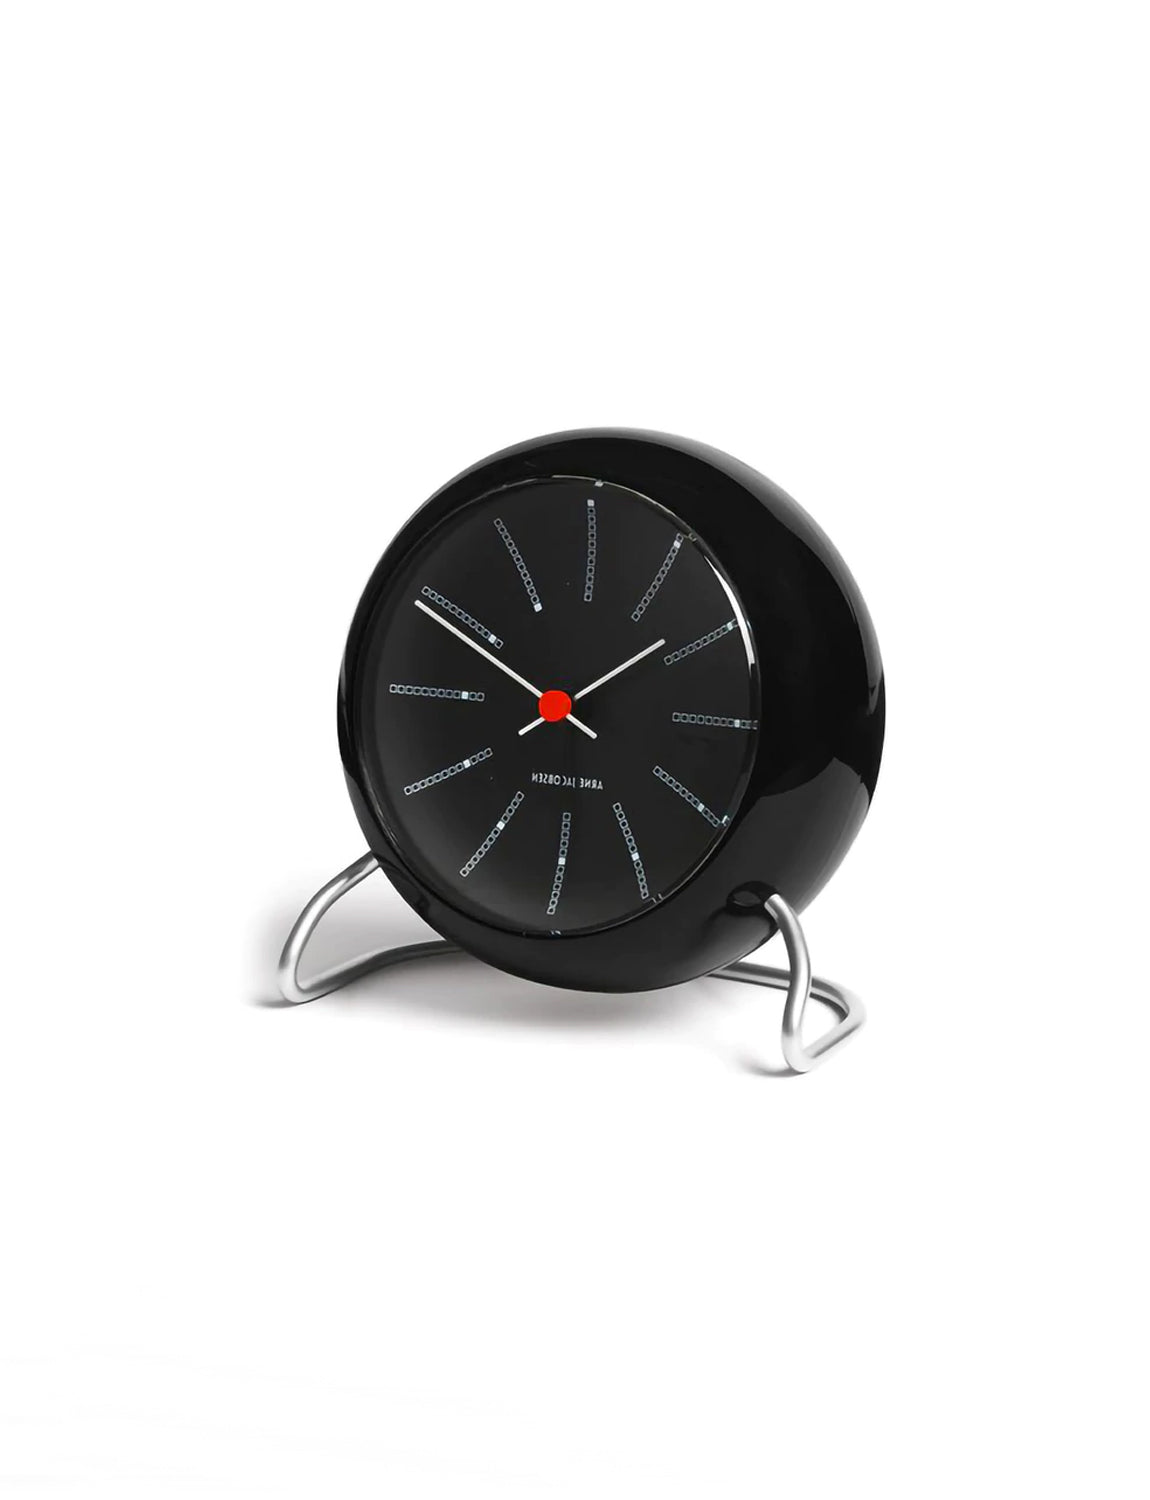 Bankers Table Clock Rosendahl Timepieces